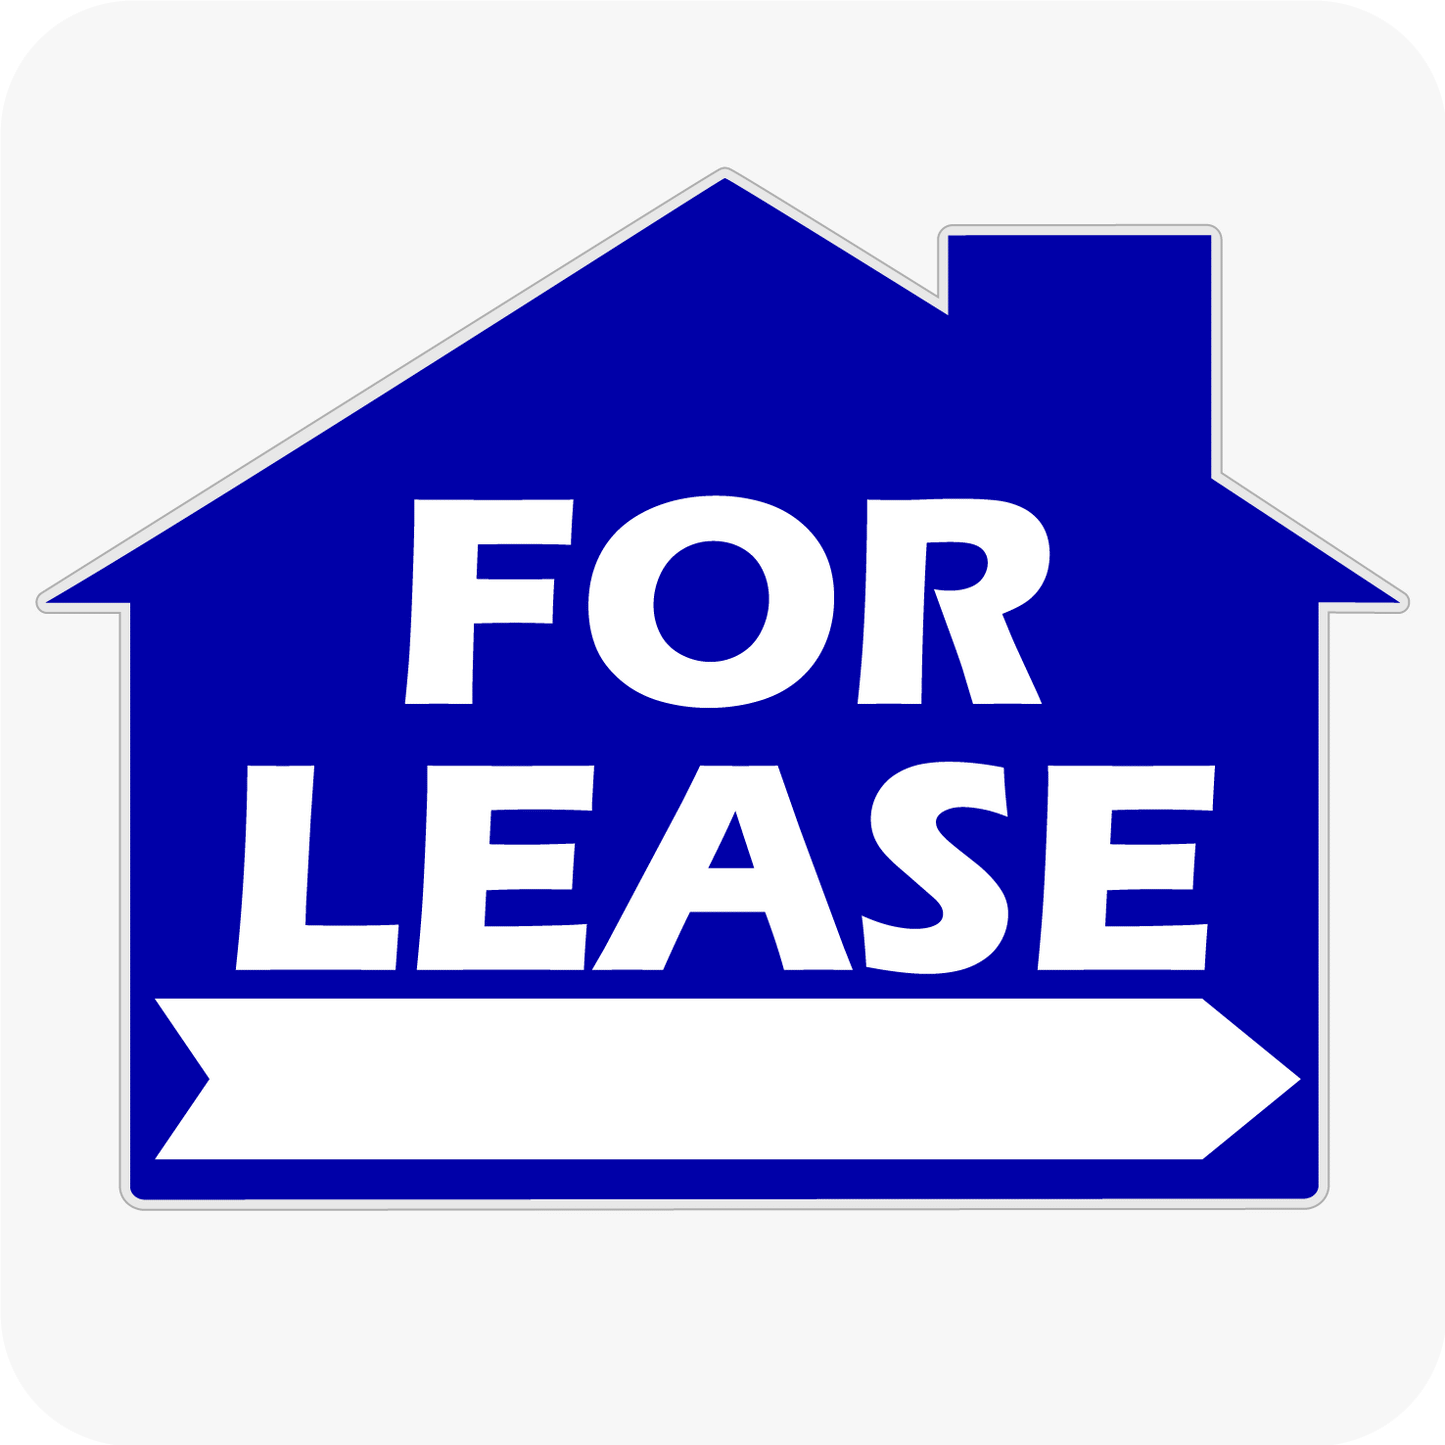 For Lease - House Shaped Sign 18x24 - Blue